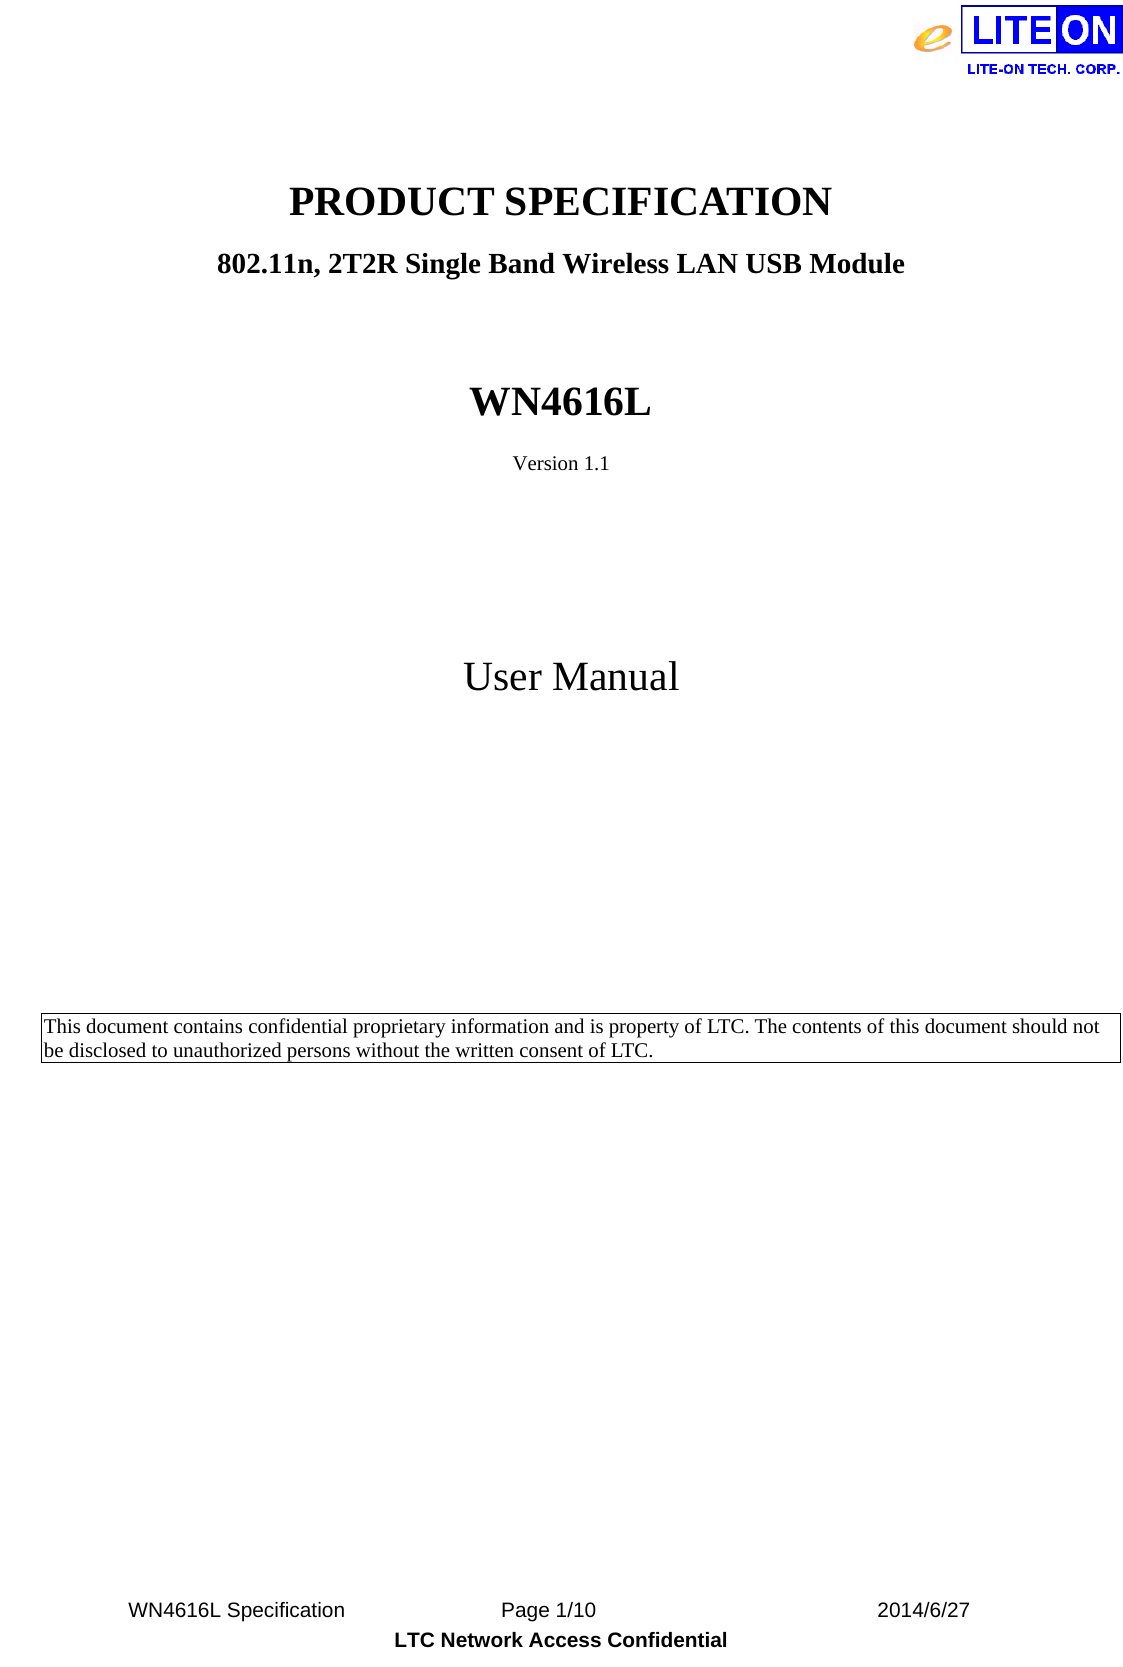  WN4616L Specification               Page 1/10                           2014/6/27 LTC Network Access Confidential  PRODUCT SPECIFICATION 802.11n, 2T2R Single Band Wireless LAN USB Module  WN4616L Version 1.1    User Manual           This document contains confidential proprietary information and is property of LTC. The contents of this document should not be disclosed to unauthorized persons without the written consent of LTC.            